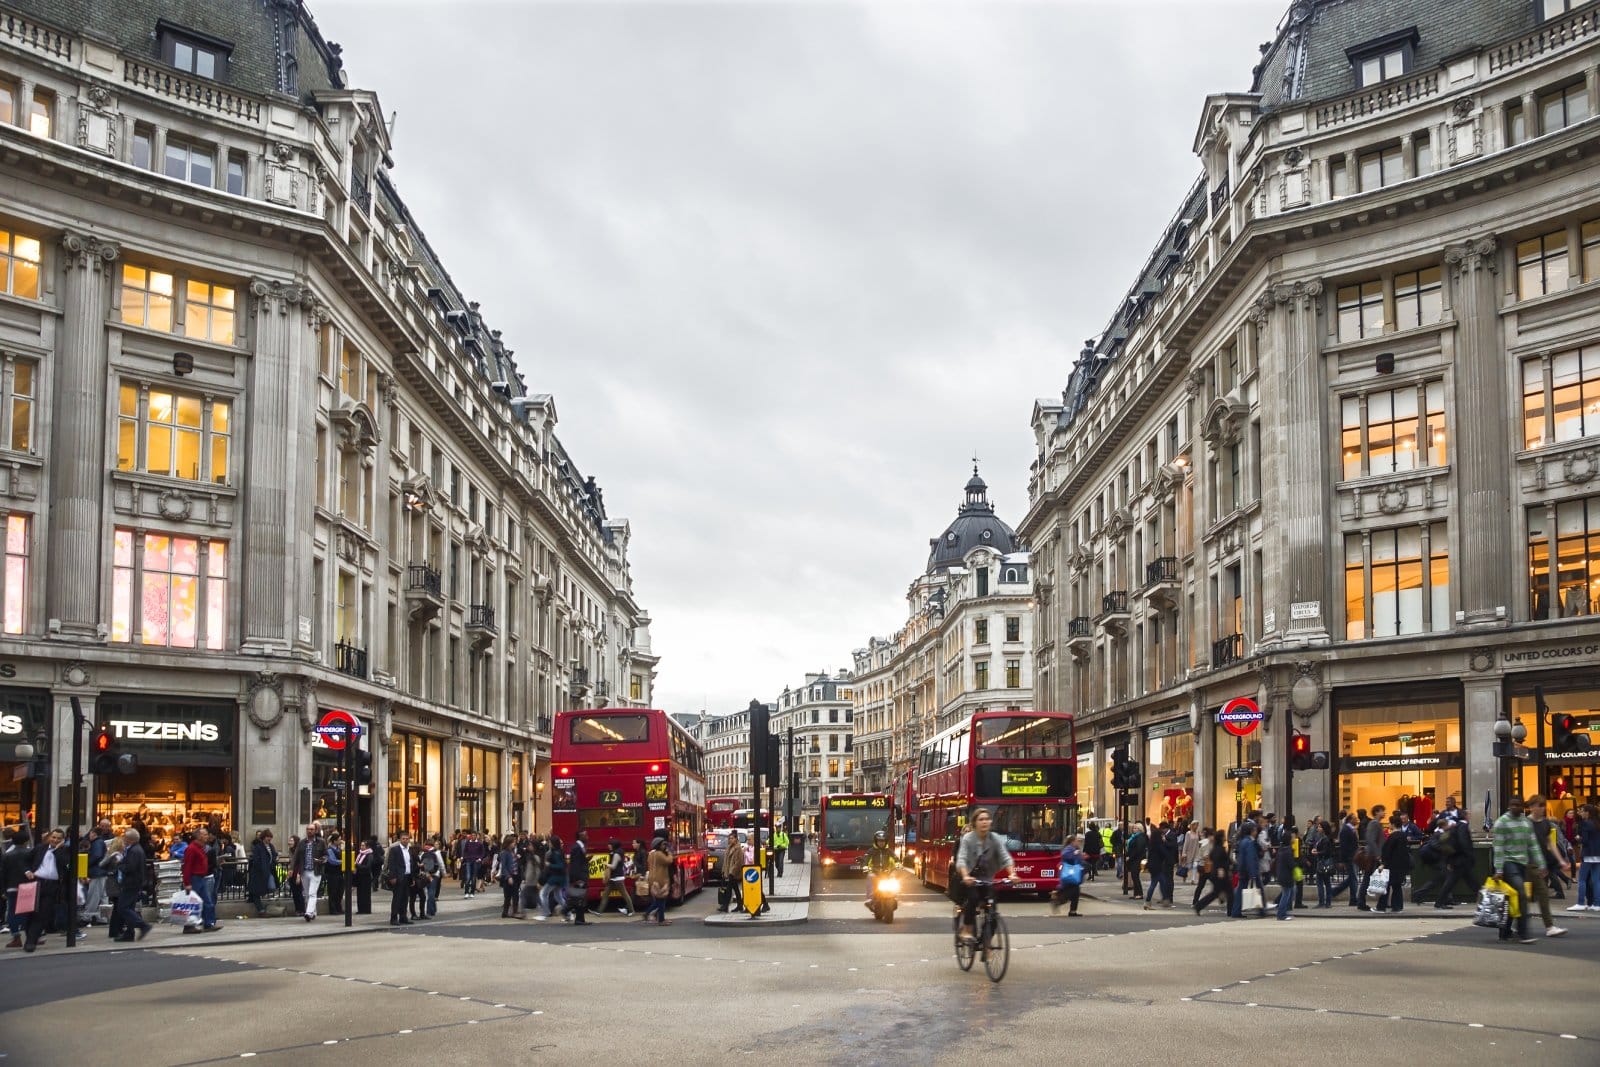 Image Credit: Shutterstock / elenaburn <p><span>Whether you prioritize career opportunities, cultural attractions, or a peaceful environment, these top 10 places offer something for everyone.</span></p> <p>The post The Top 10 Places to Live in the UK, According to Stats first appeared on Edge Media</p> <p>Featured Image Credit: Shutterstock / Zigres.</p> <p>For transparency, this content was partly developed with AI assistance and carefully curated by an experienced editor to be informative and ensure accuracy.</p>